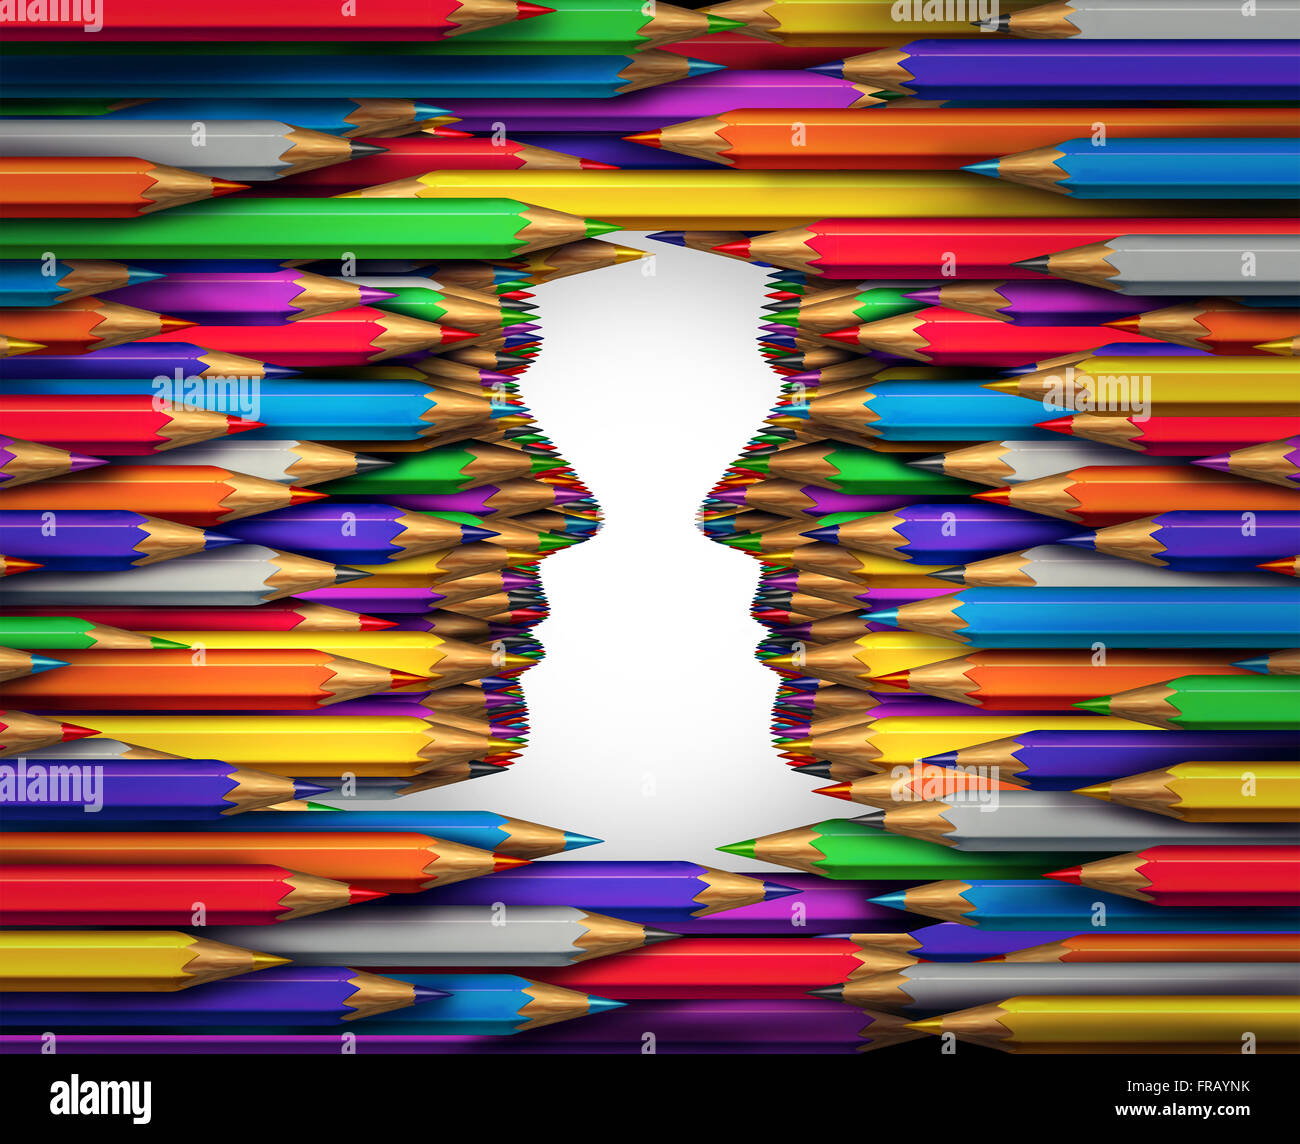 Creative exchange concept as a group of colored pencil crayons shaped as two human heads facing each other as a creativity collaboration and art direction and design communication metaphor. Stock Photo